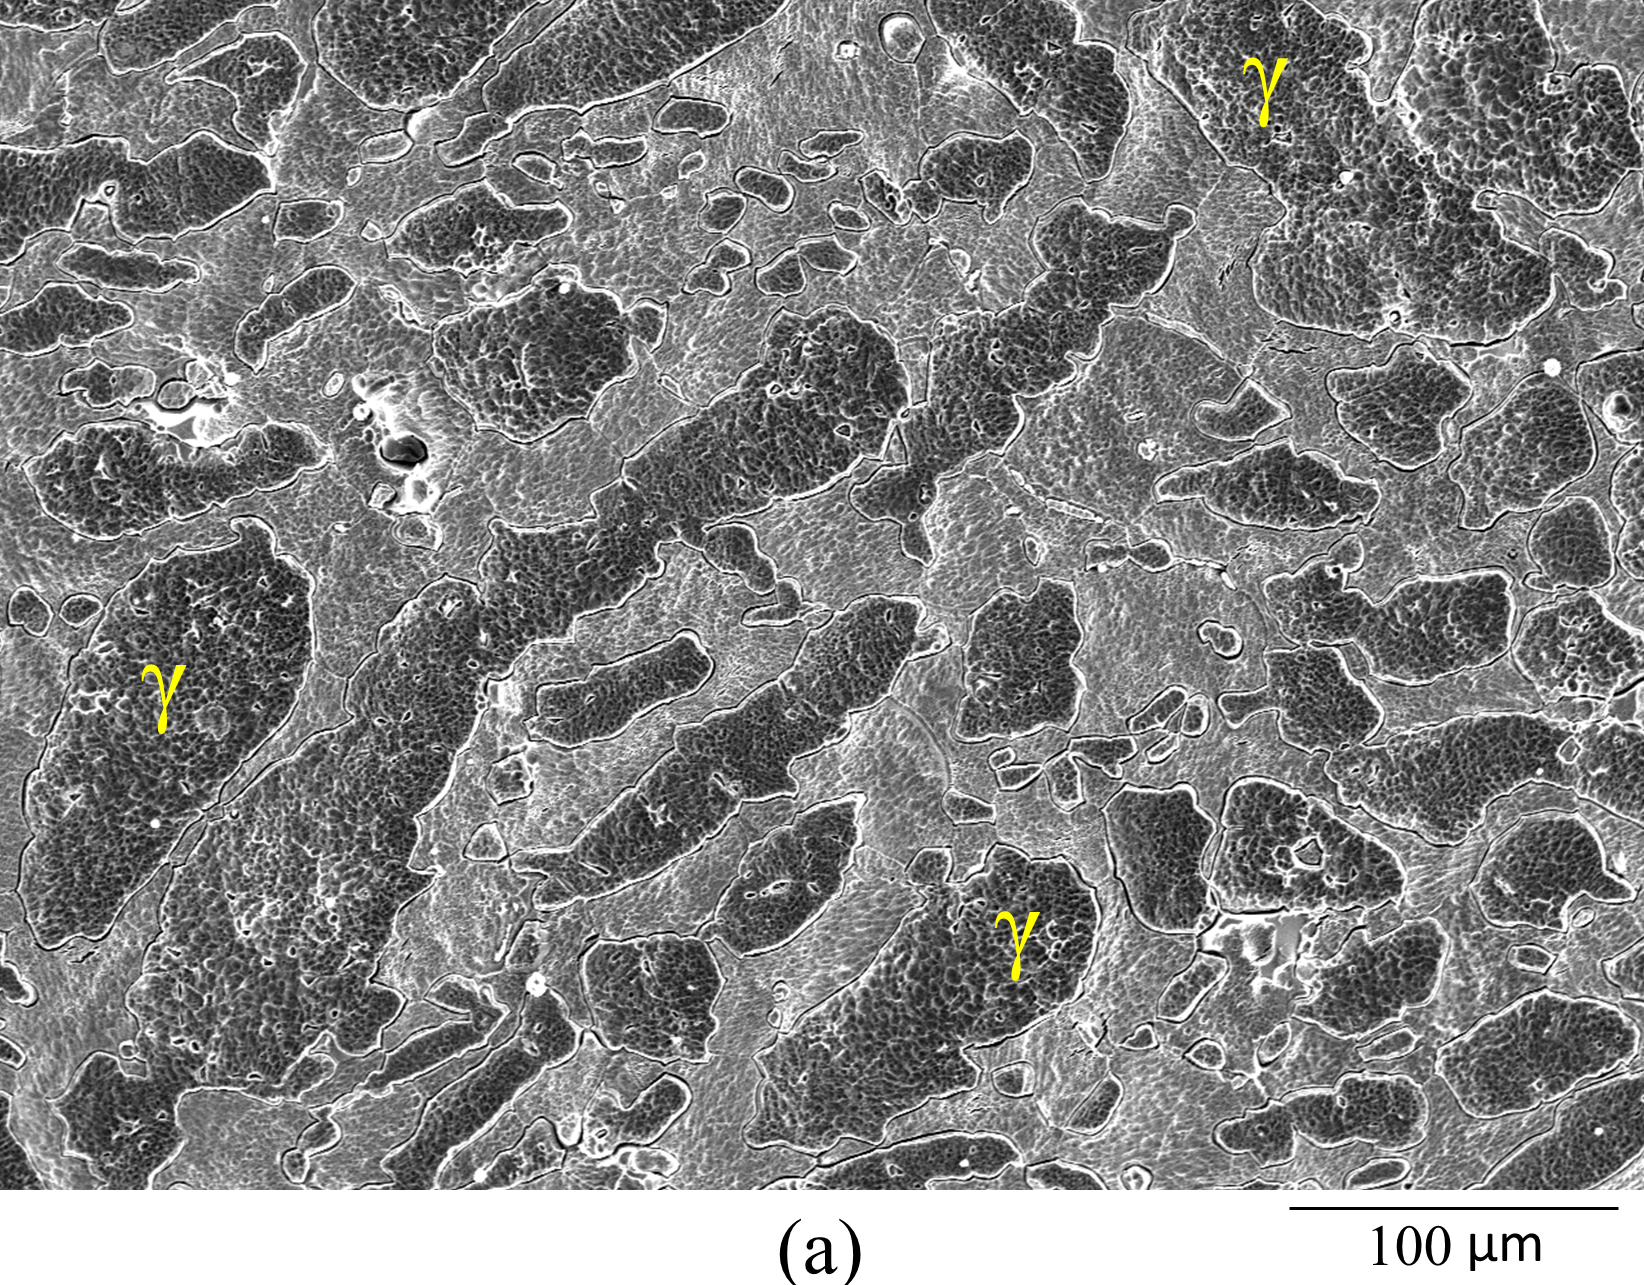 Figure 1a. SEM secondary electron images of (a) UNS S32750 specimens after the anodic potentiodynamic polarization in a 7 M LiCl solution at 60 °C. In the pictures, the austenite phase (γ) is indicated. The other phase is ferrite (α).